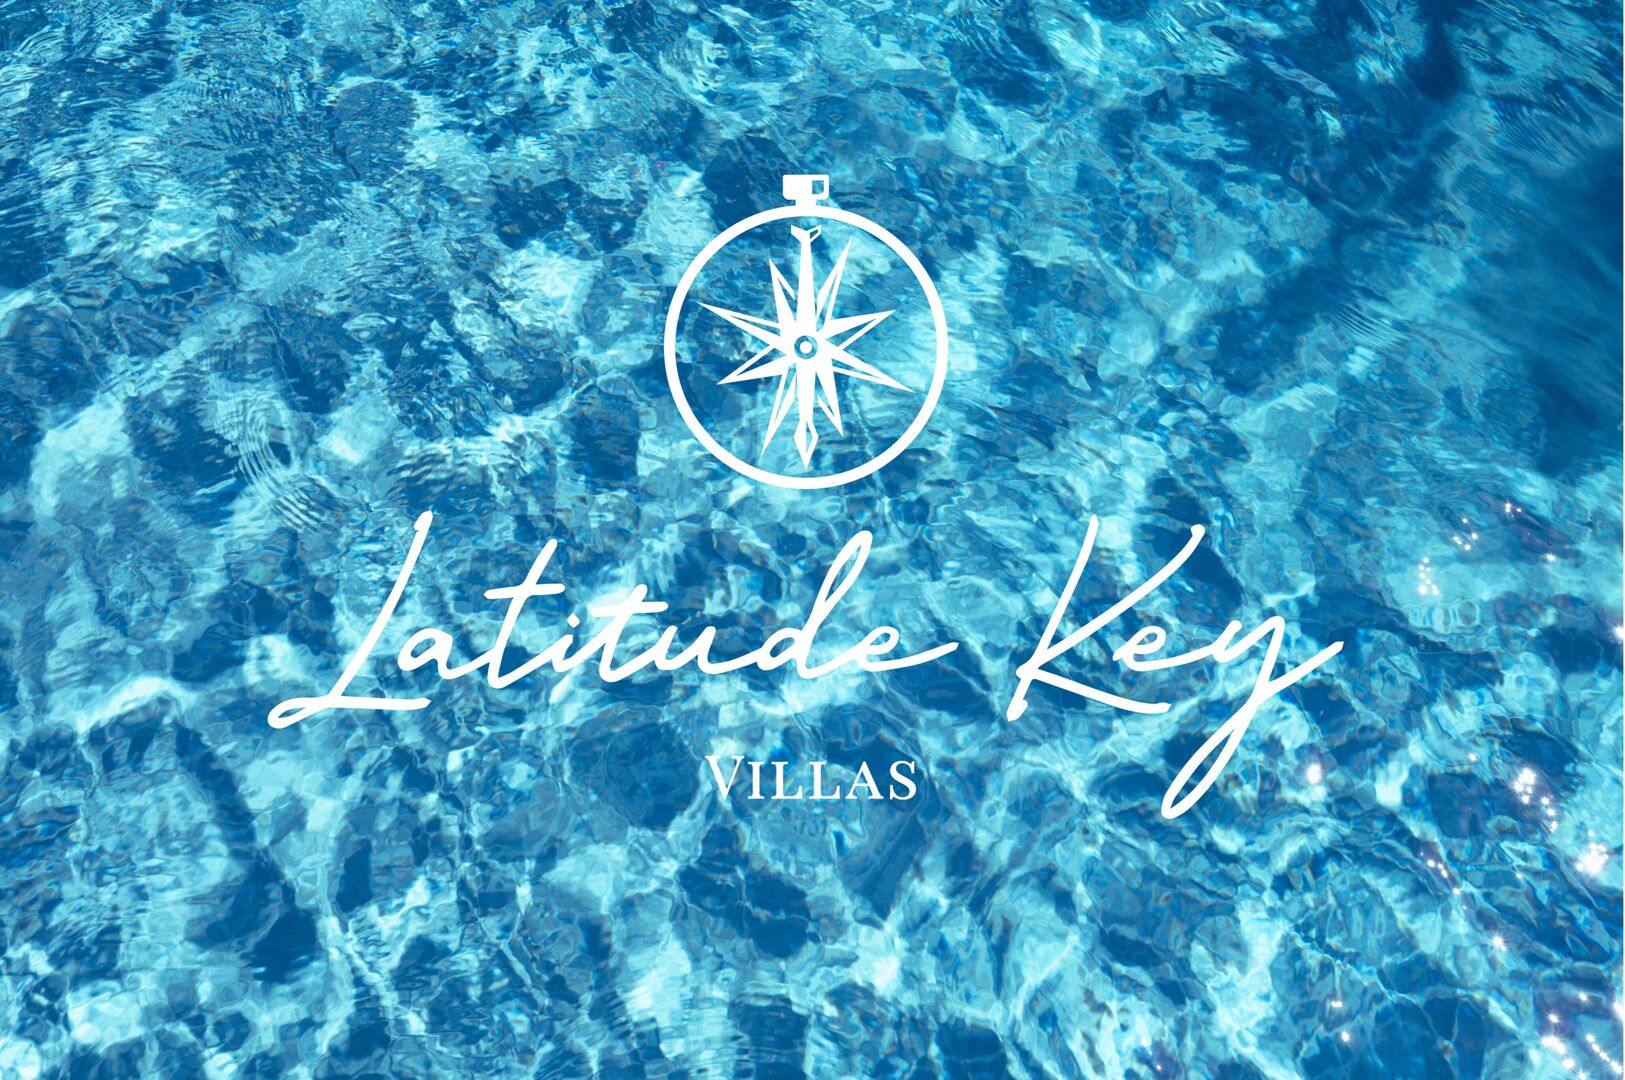 Seabreeze Key in Fort Lauderdale is part of the Villas Collection. 
Enjoy a stress free vacation with Latitude Key - Curated Vacation Properties.